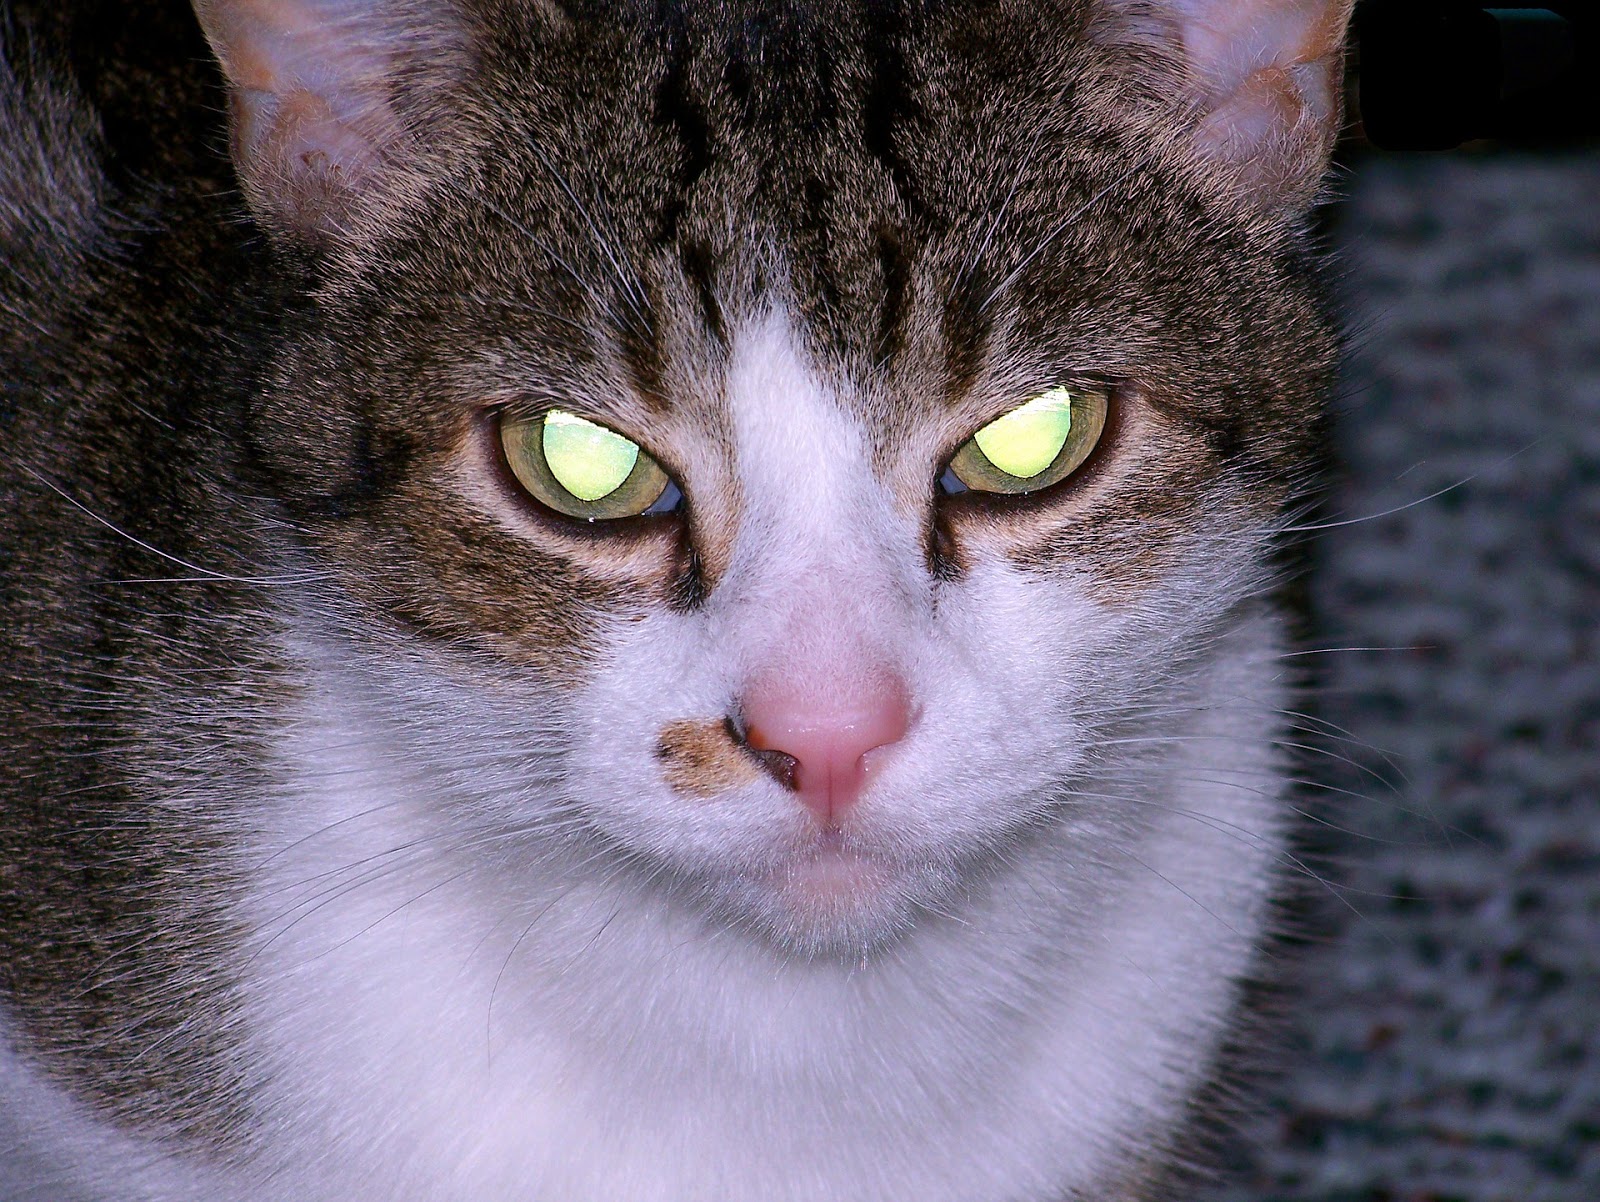 Why Do Cat's Eyes Glow in the Dark? - DAILY INFO PLUS